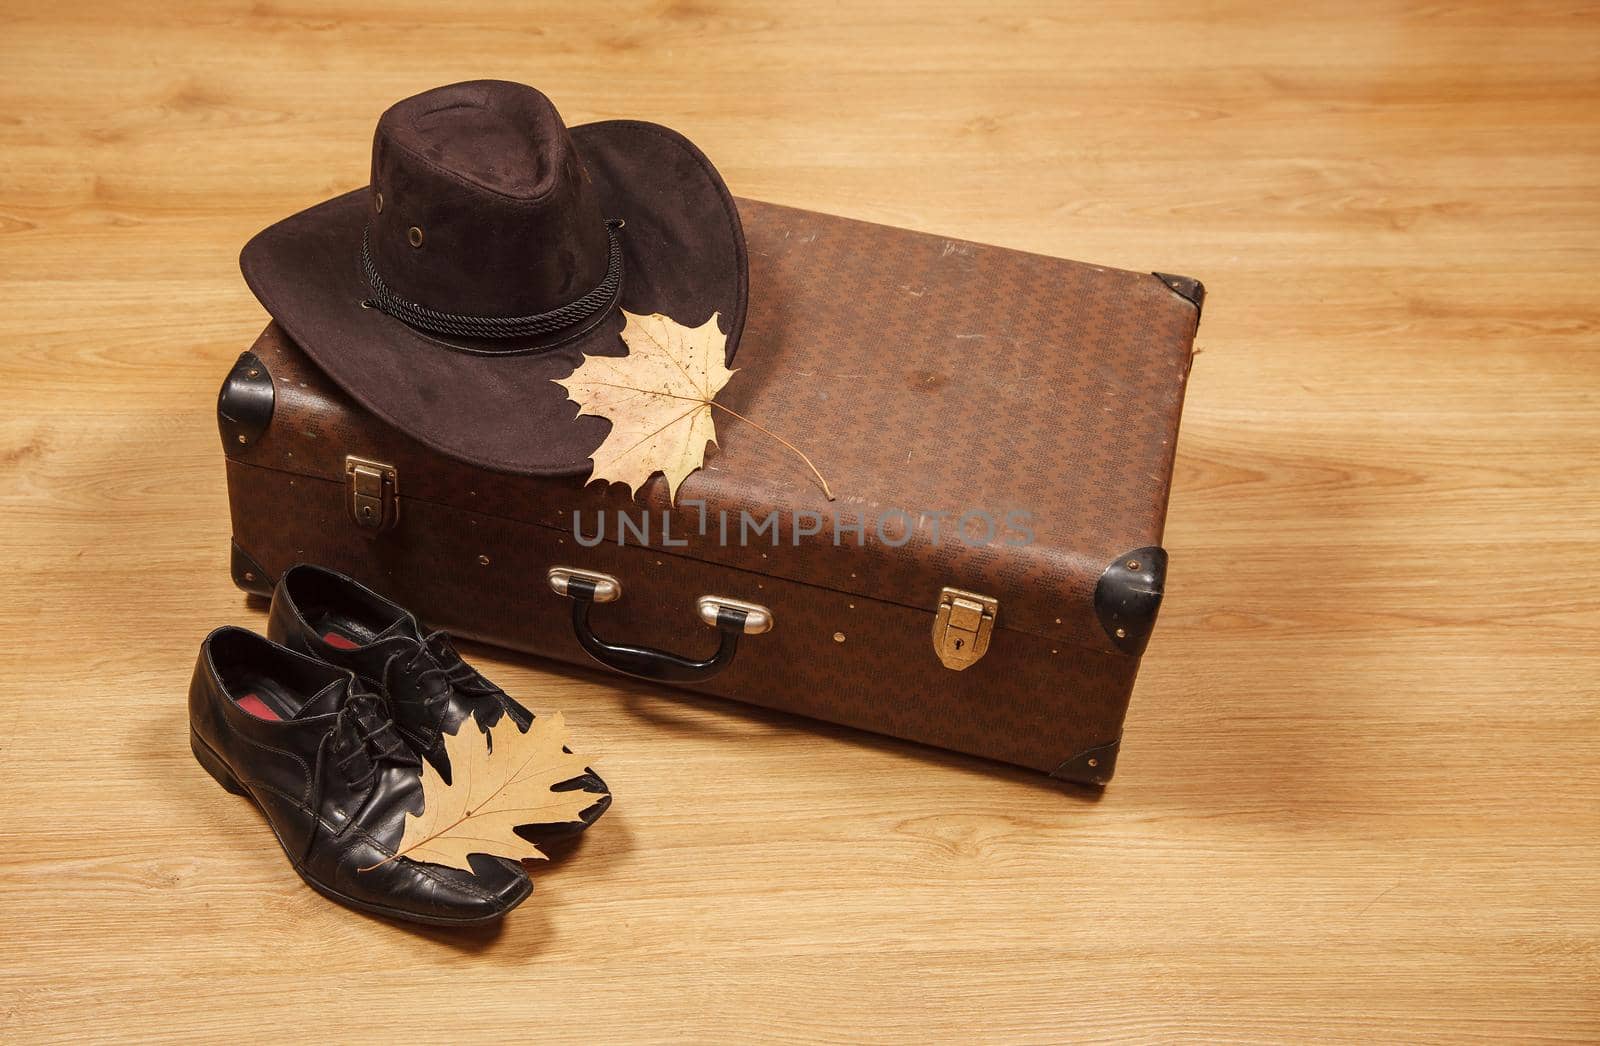 set of men's felt hat with a yellow maple leaf, black shoes and a suitcase on a wooden floor